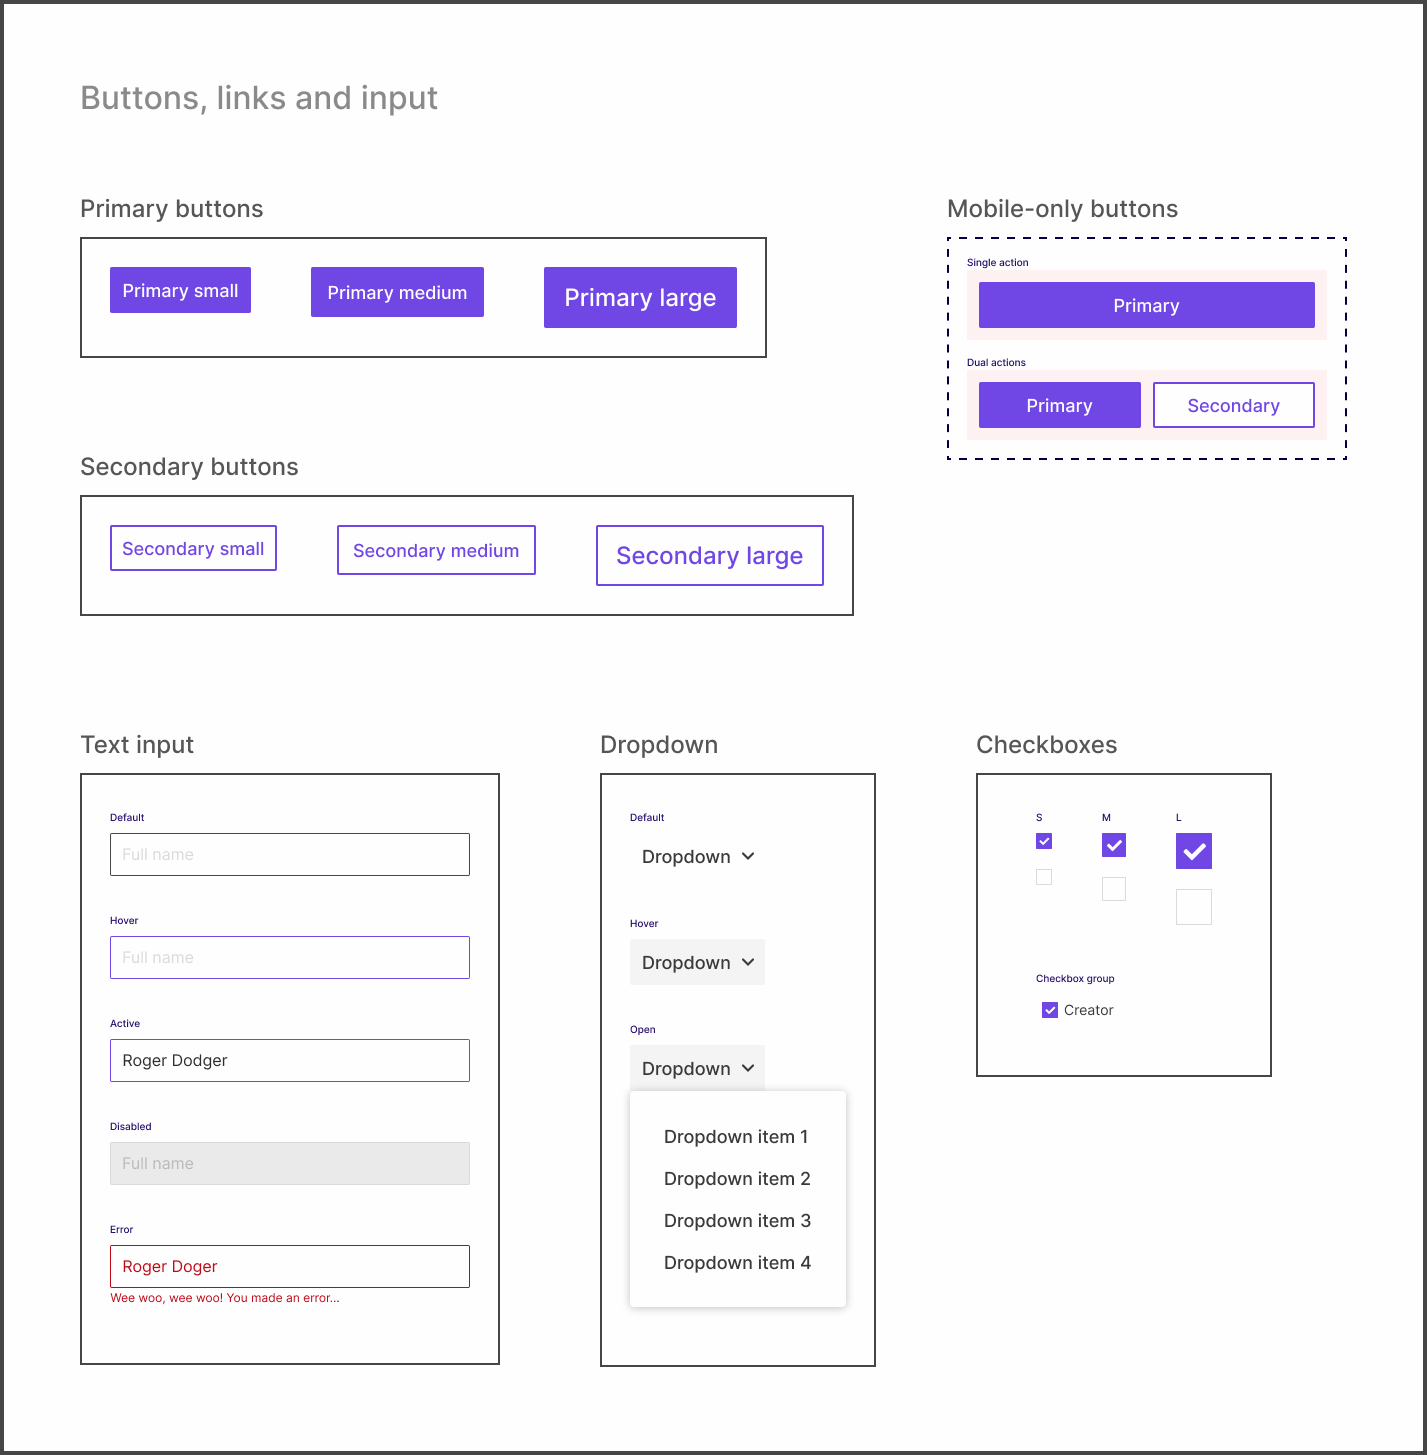 Sample from the design system: Buttons and input components